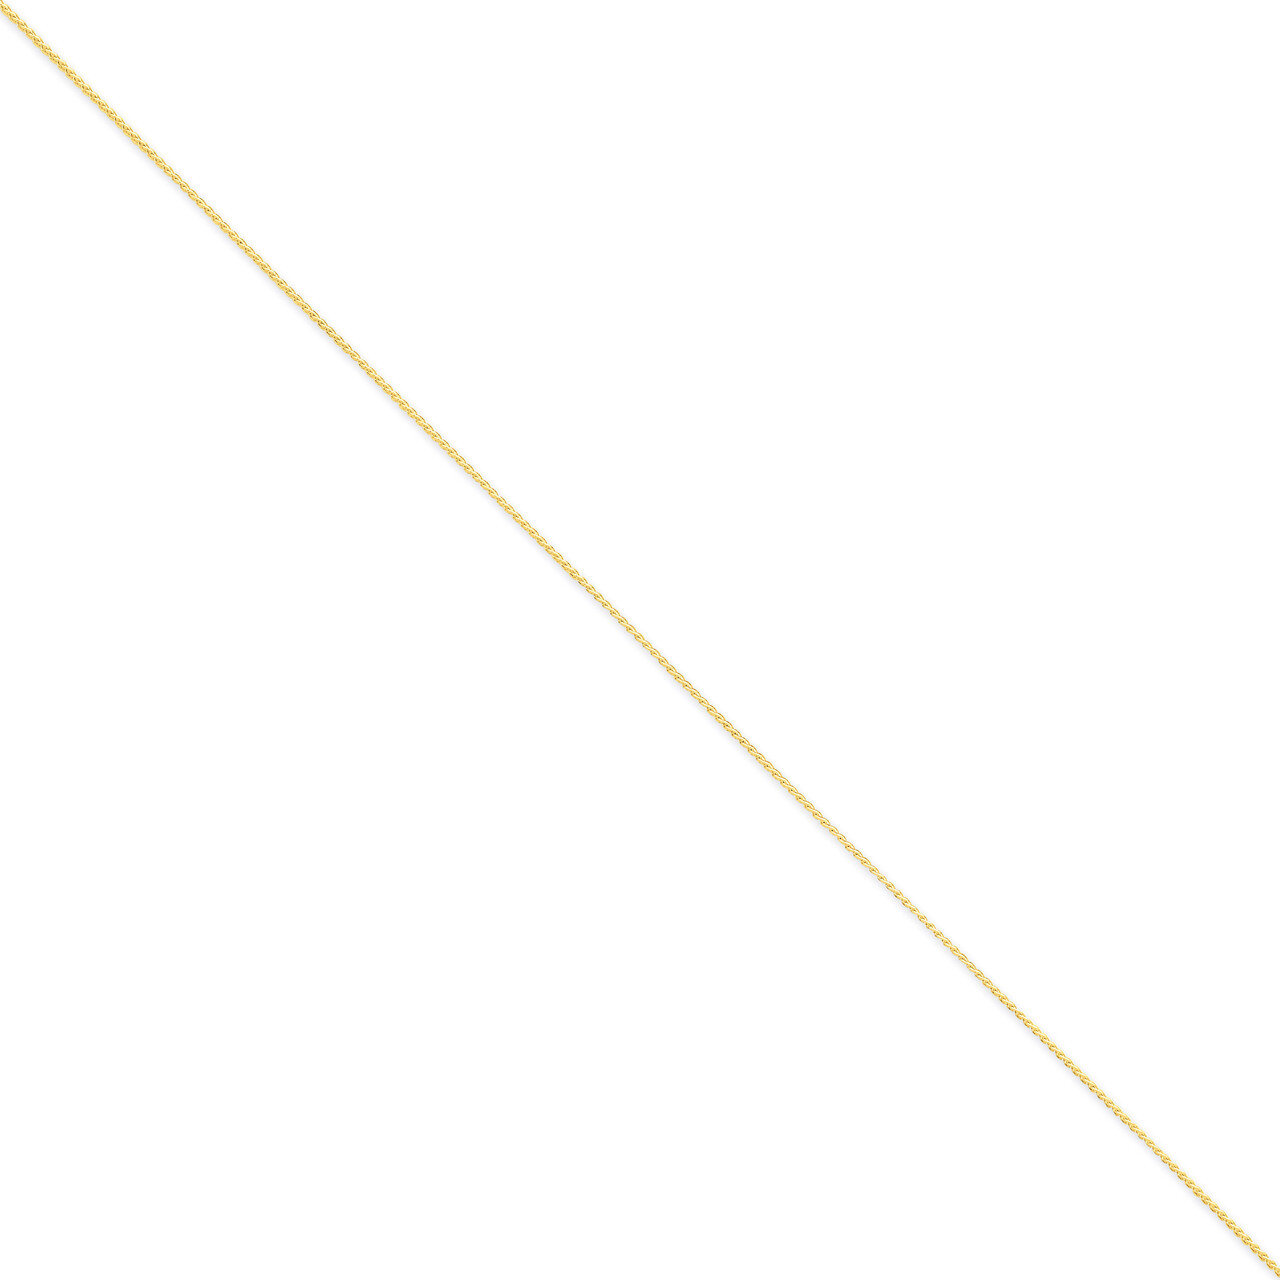 1.1mm Solid Polished Spiga Chain 24 Inch 14k Gold PEN259-24